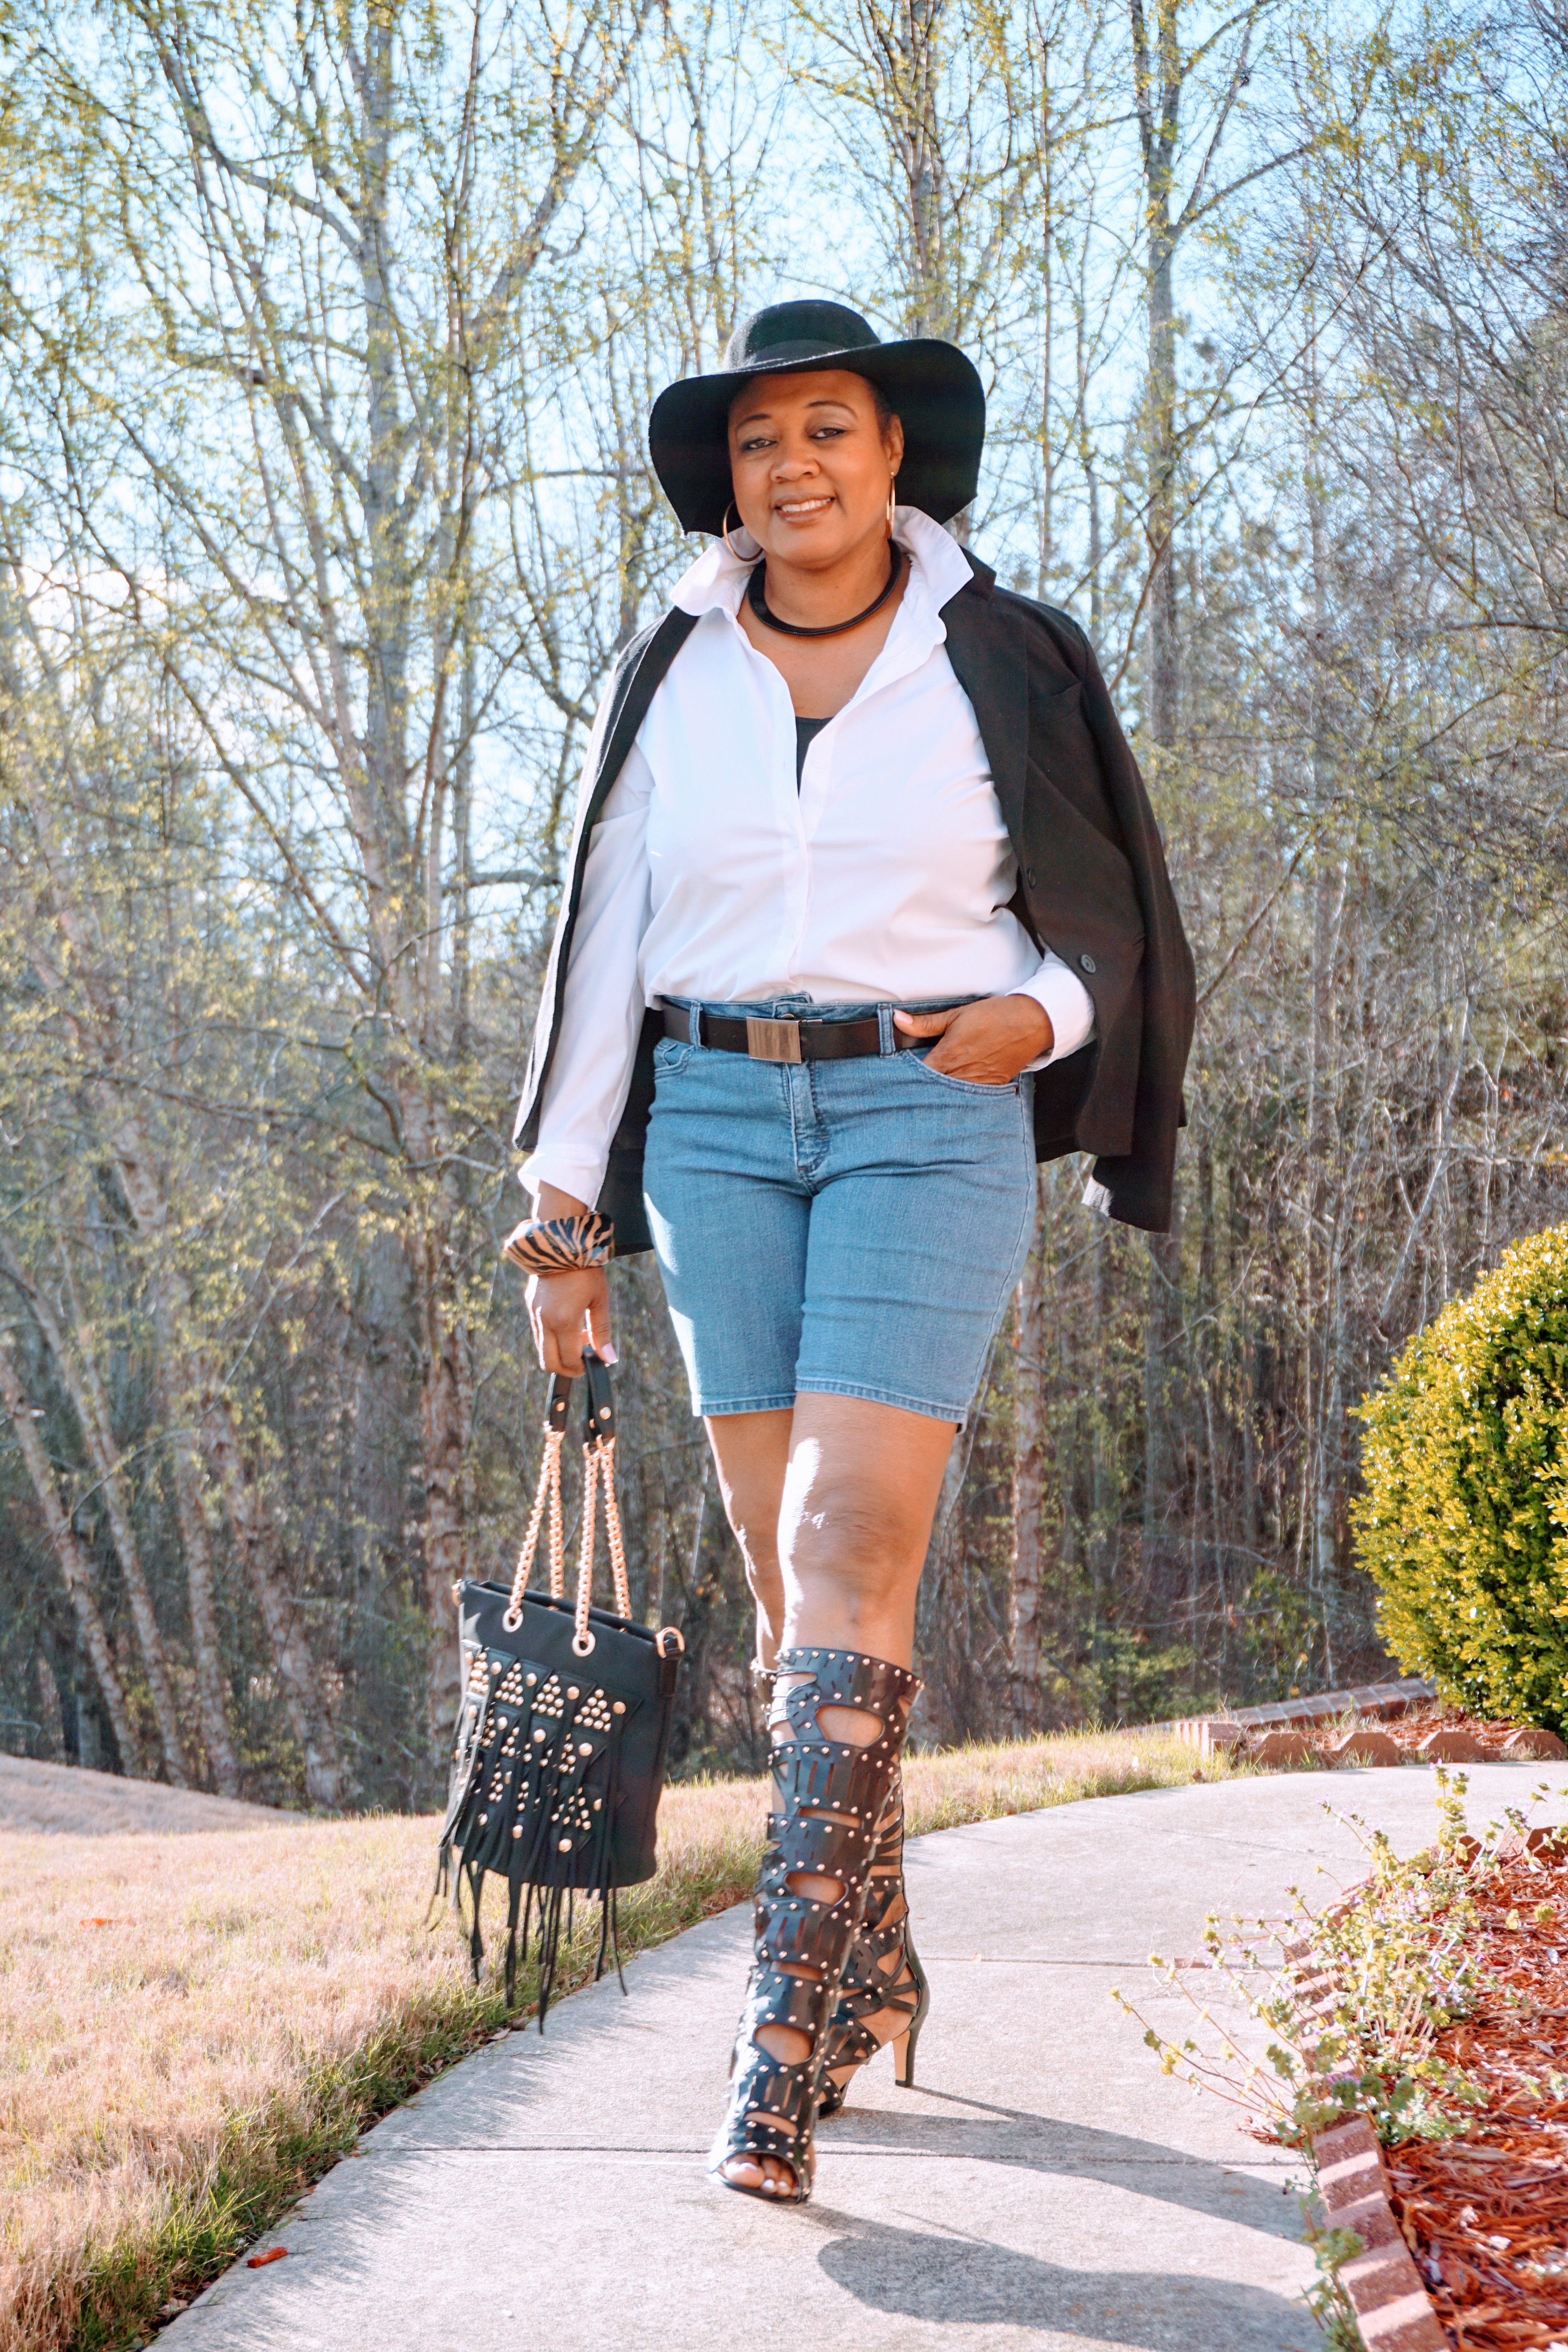 A Midnight Velvet customer in a white shirt, black jacket, jean shorts, black studded boots, and a wide brimmed black hat.